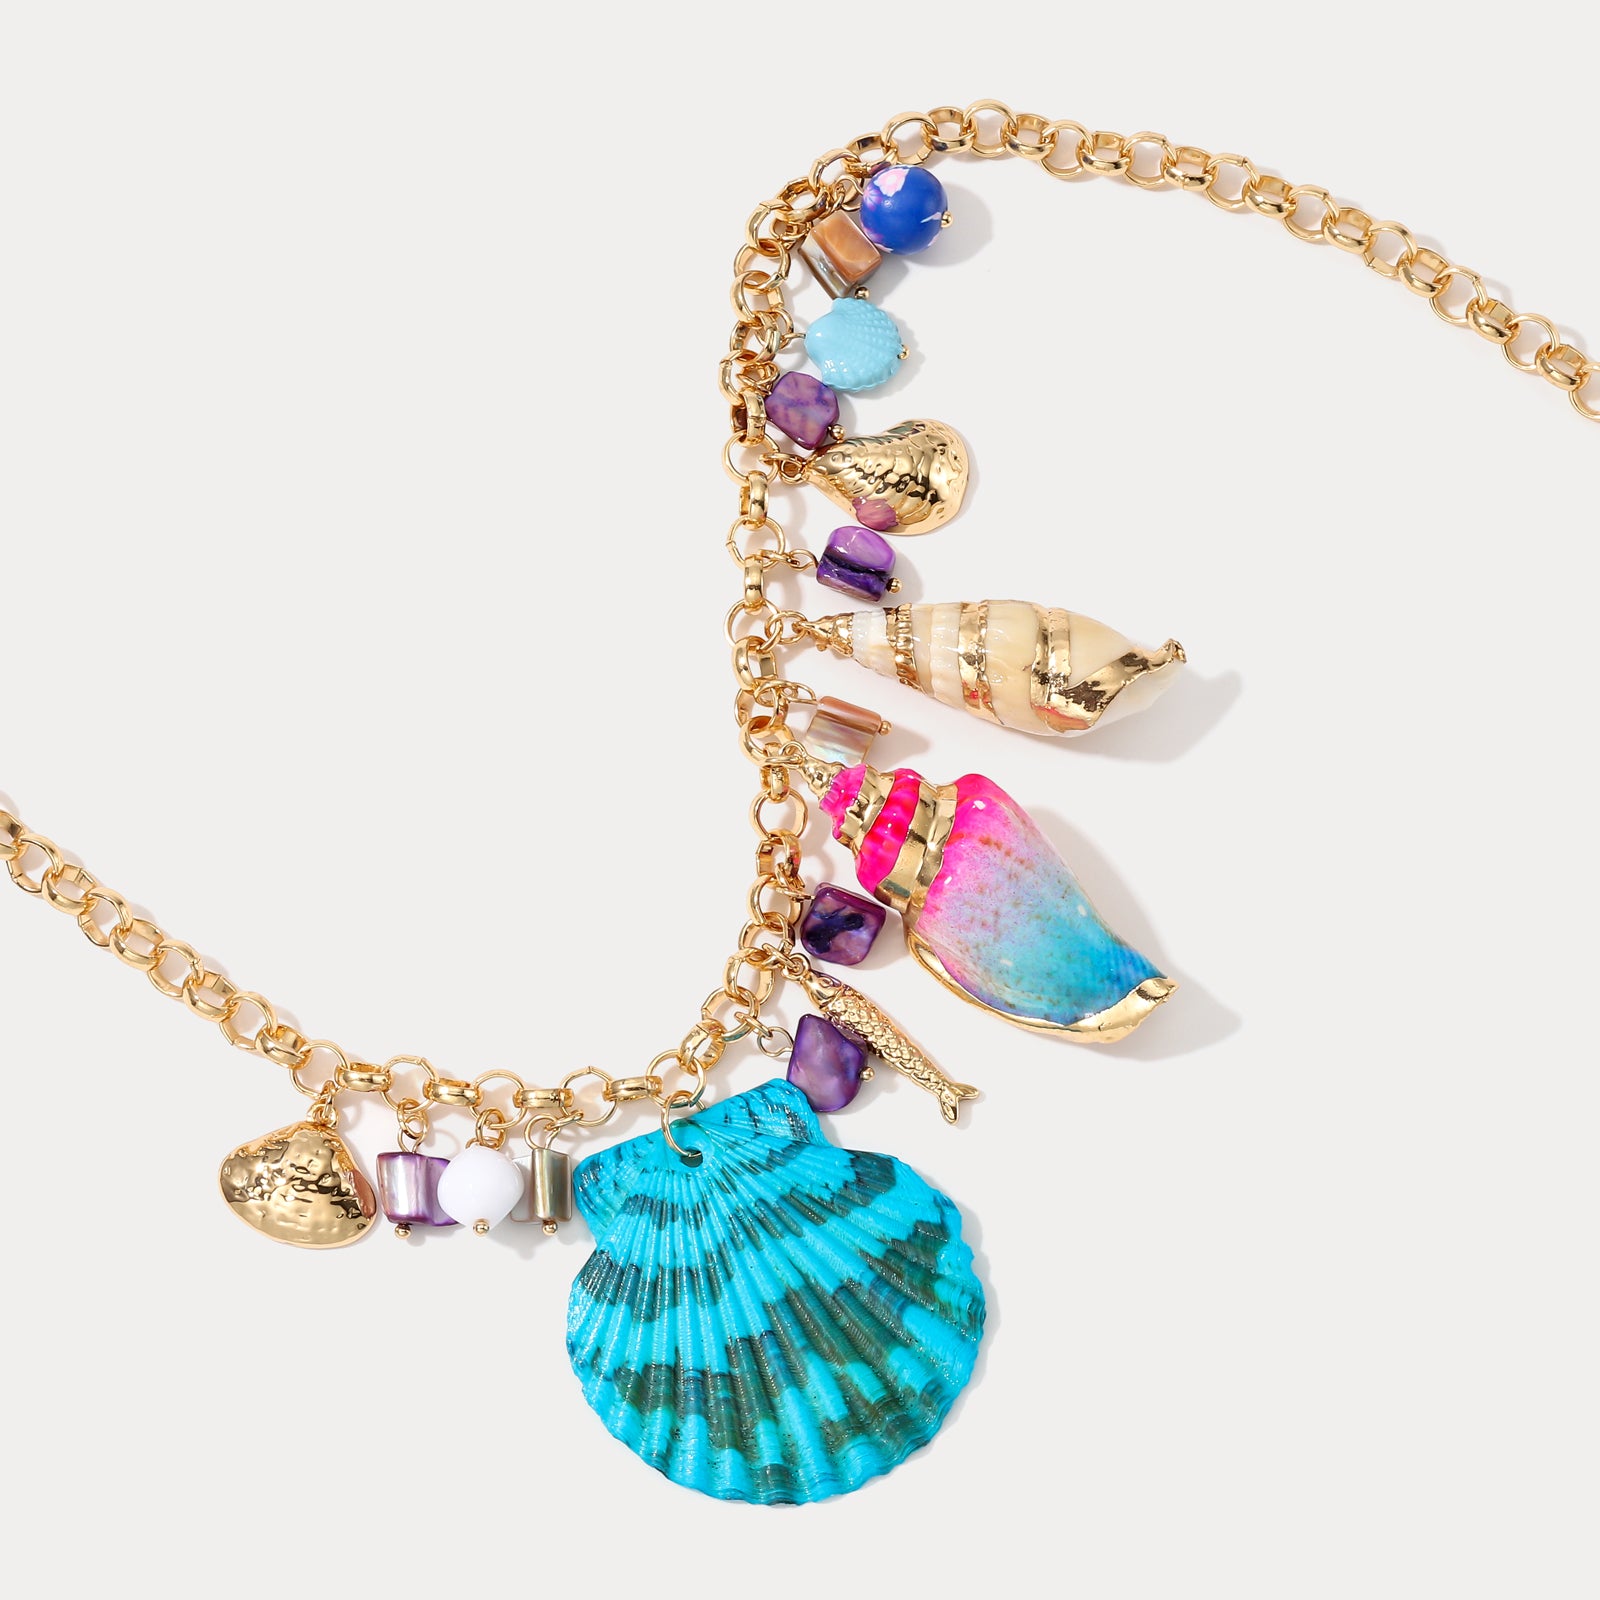 Gold Seashell Necklace